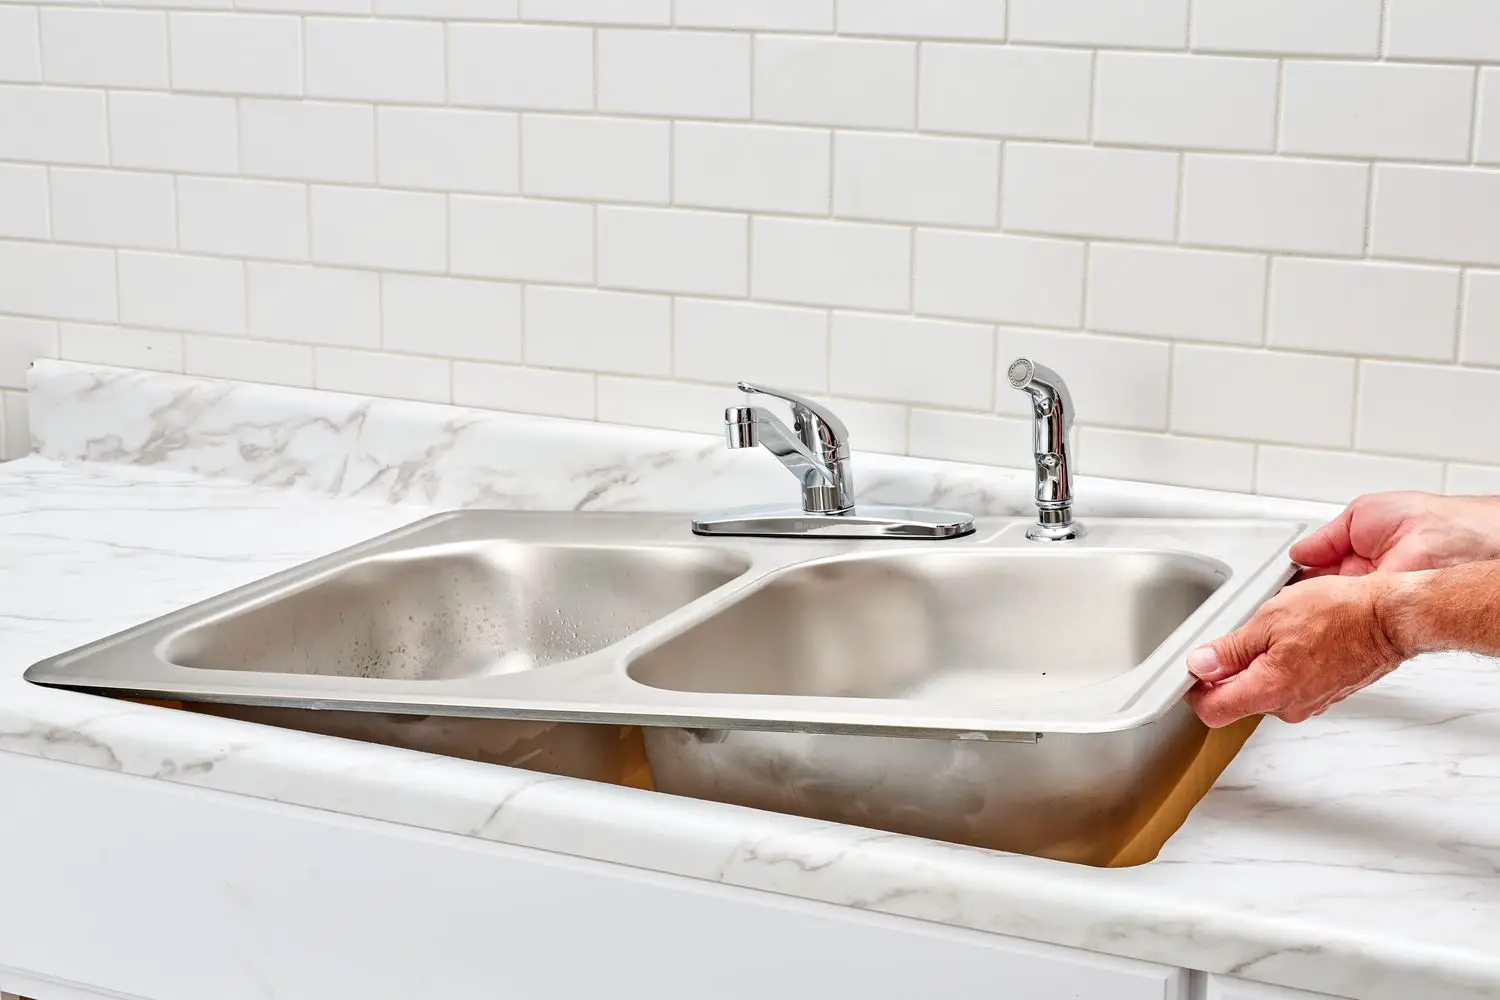 How much does it cost to hire a professional plumber to install a double kitchen sink with a disposal and dishwasher